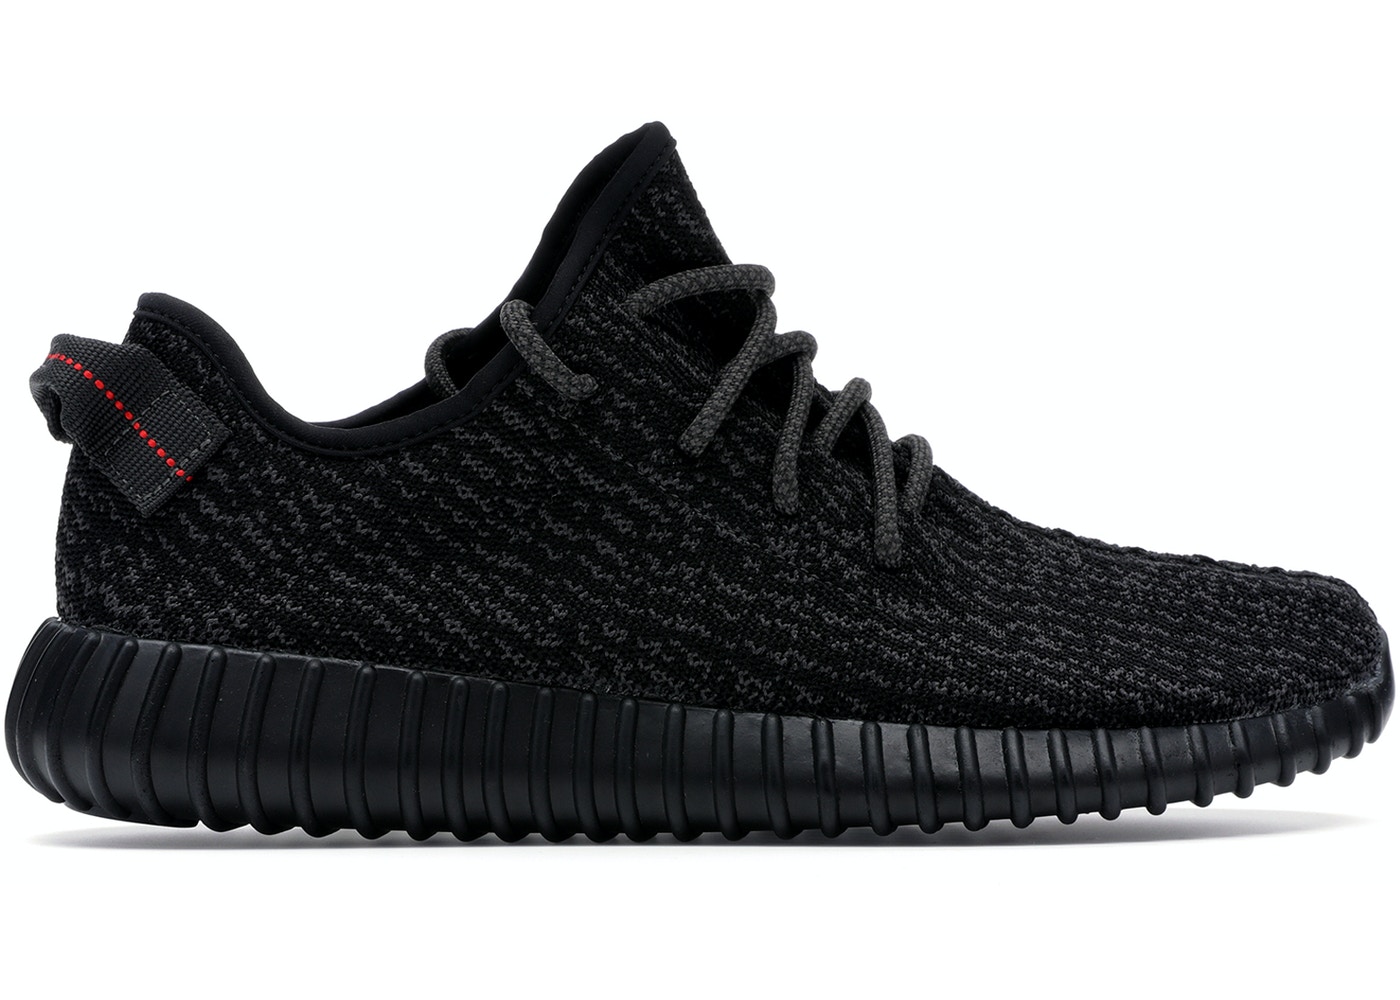 what are the best yeezys to buy